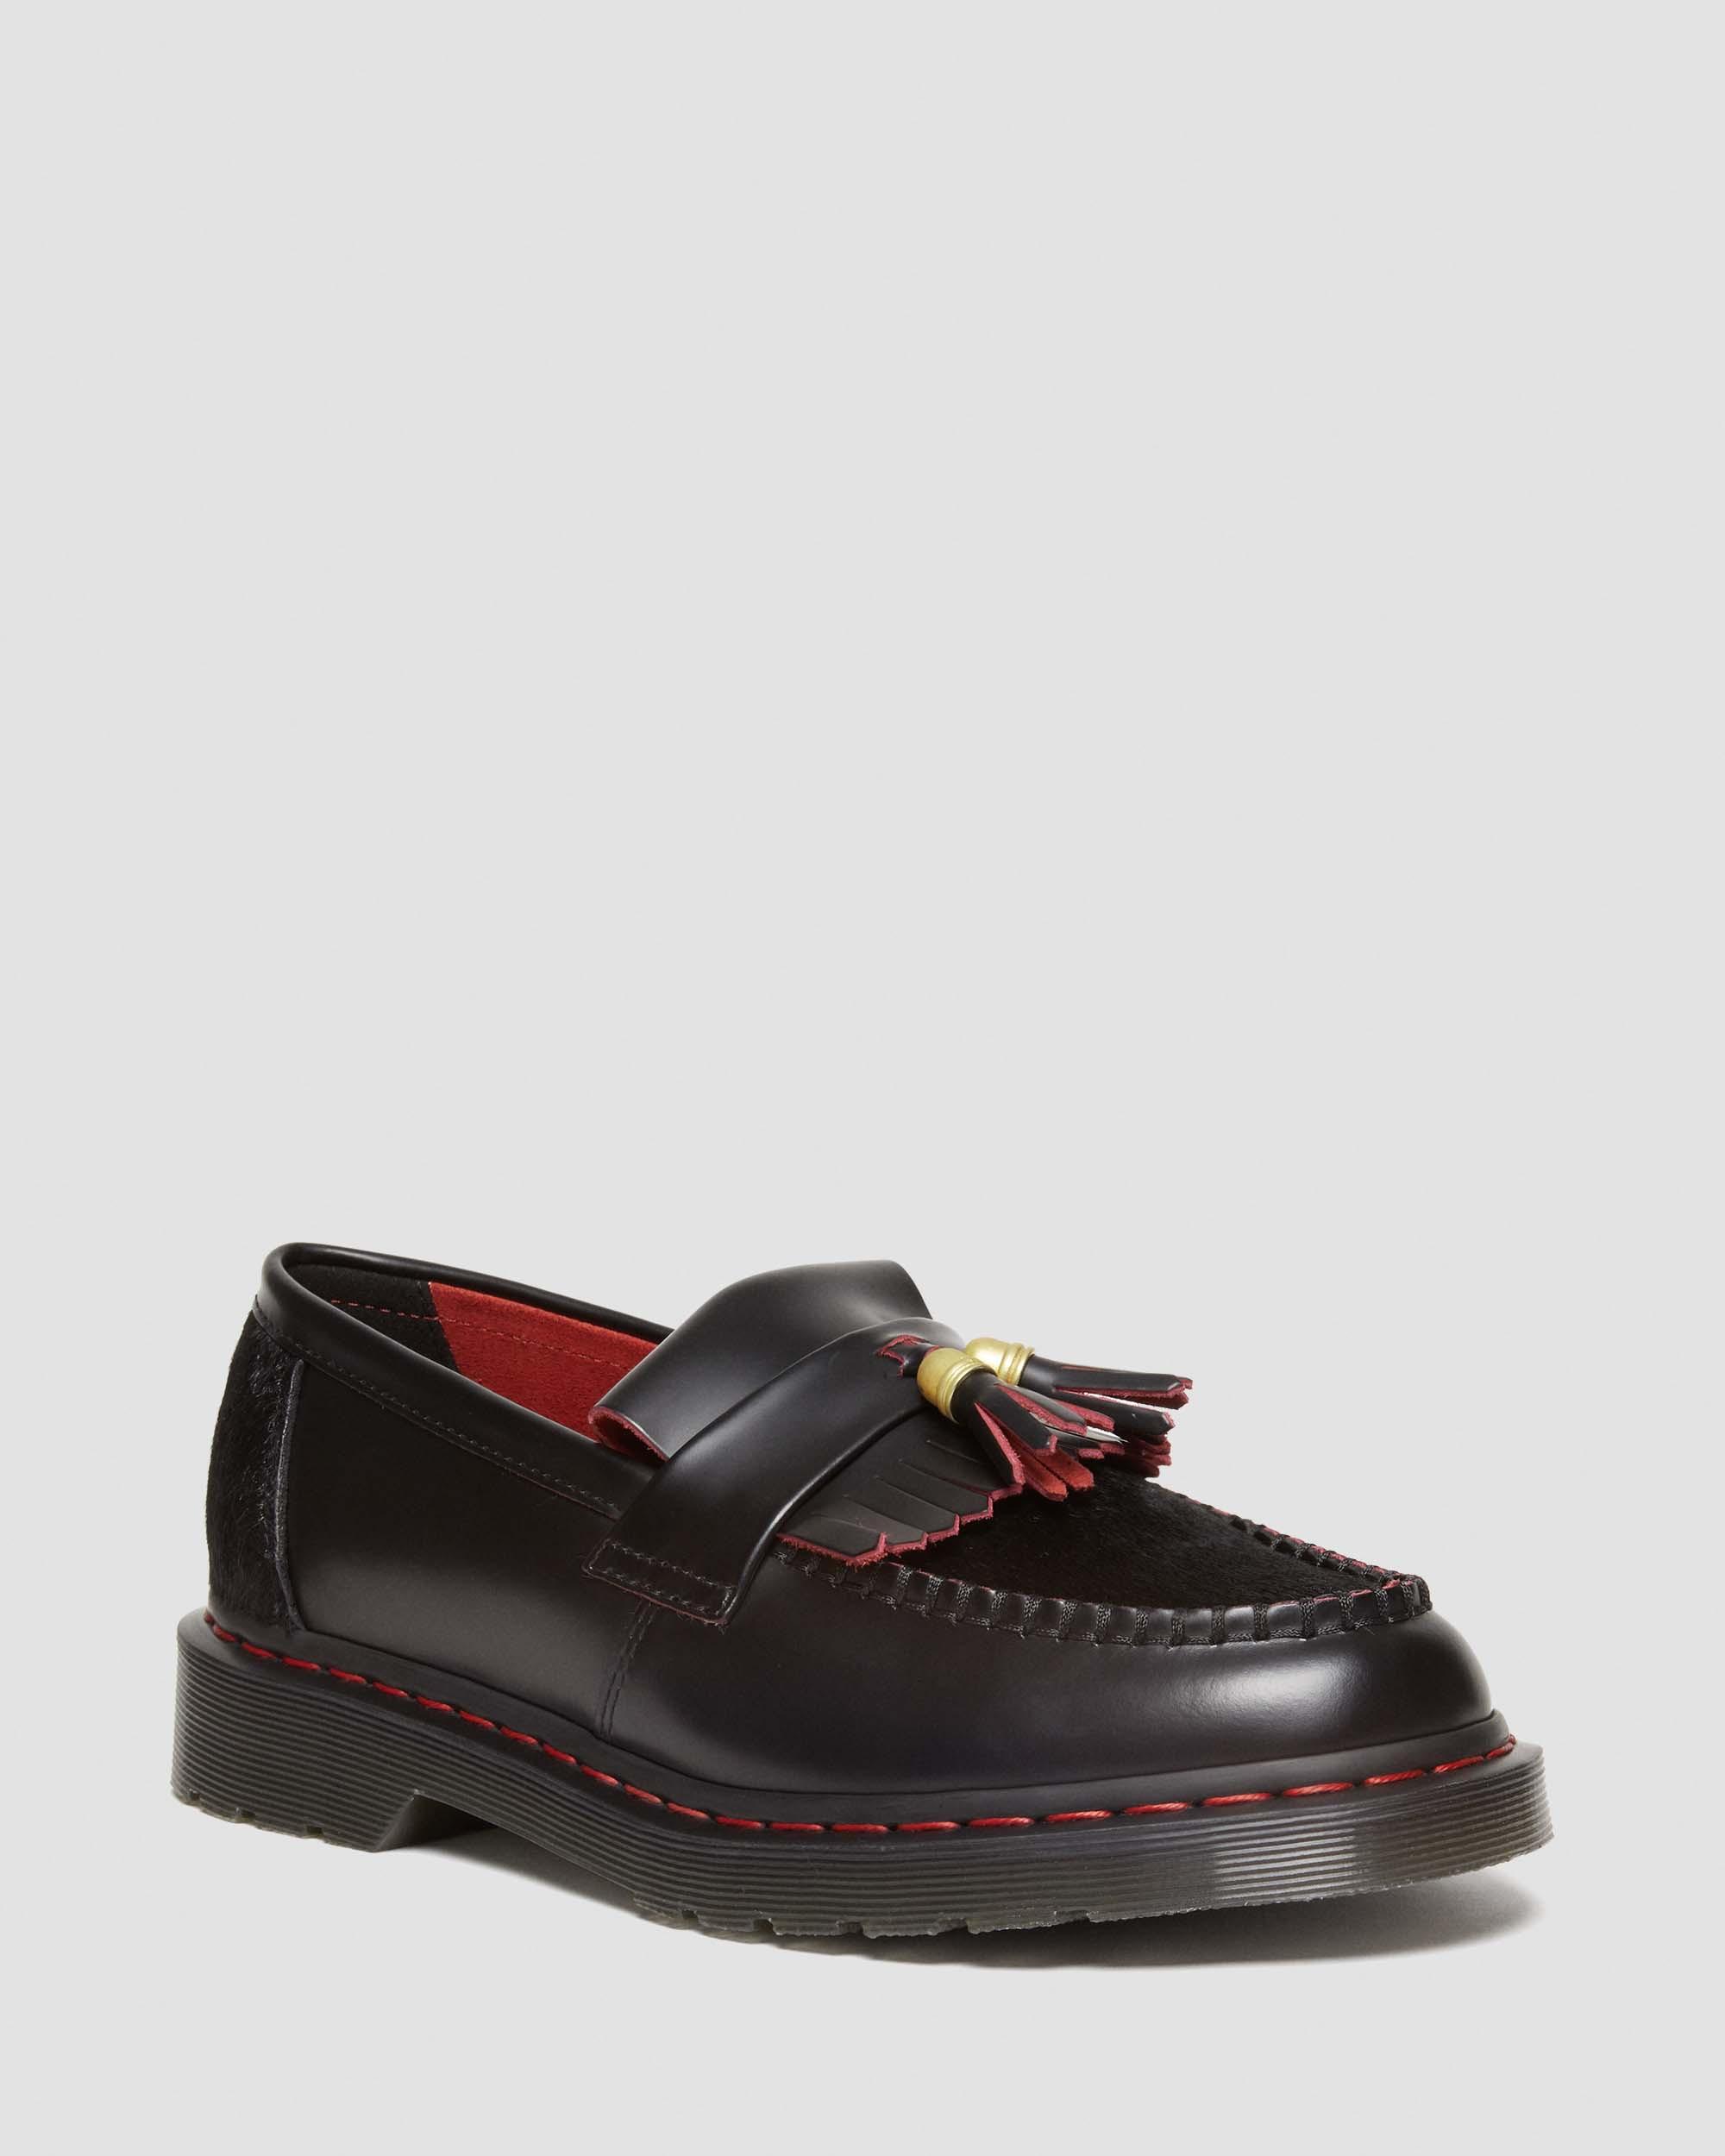 Adrian Year of the Dragon Hair-On Tassel Loafers in Black | Dr. Martens